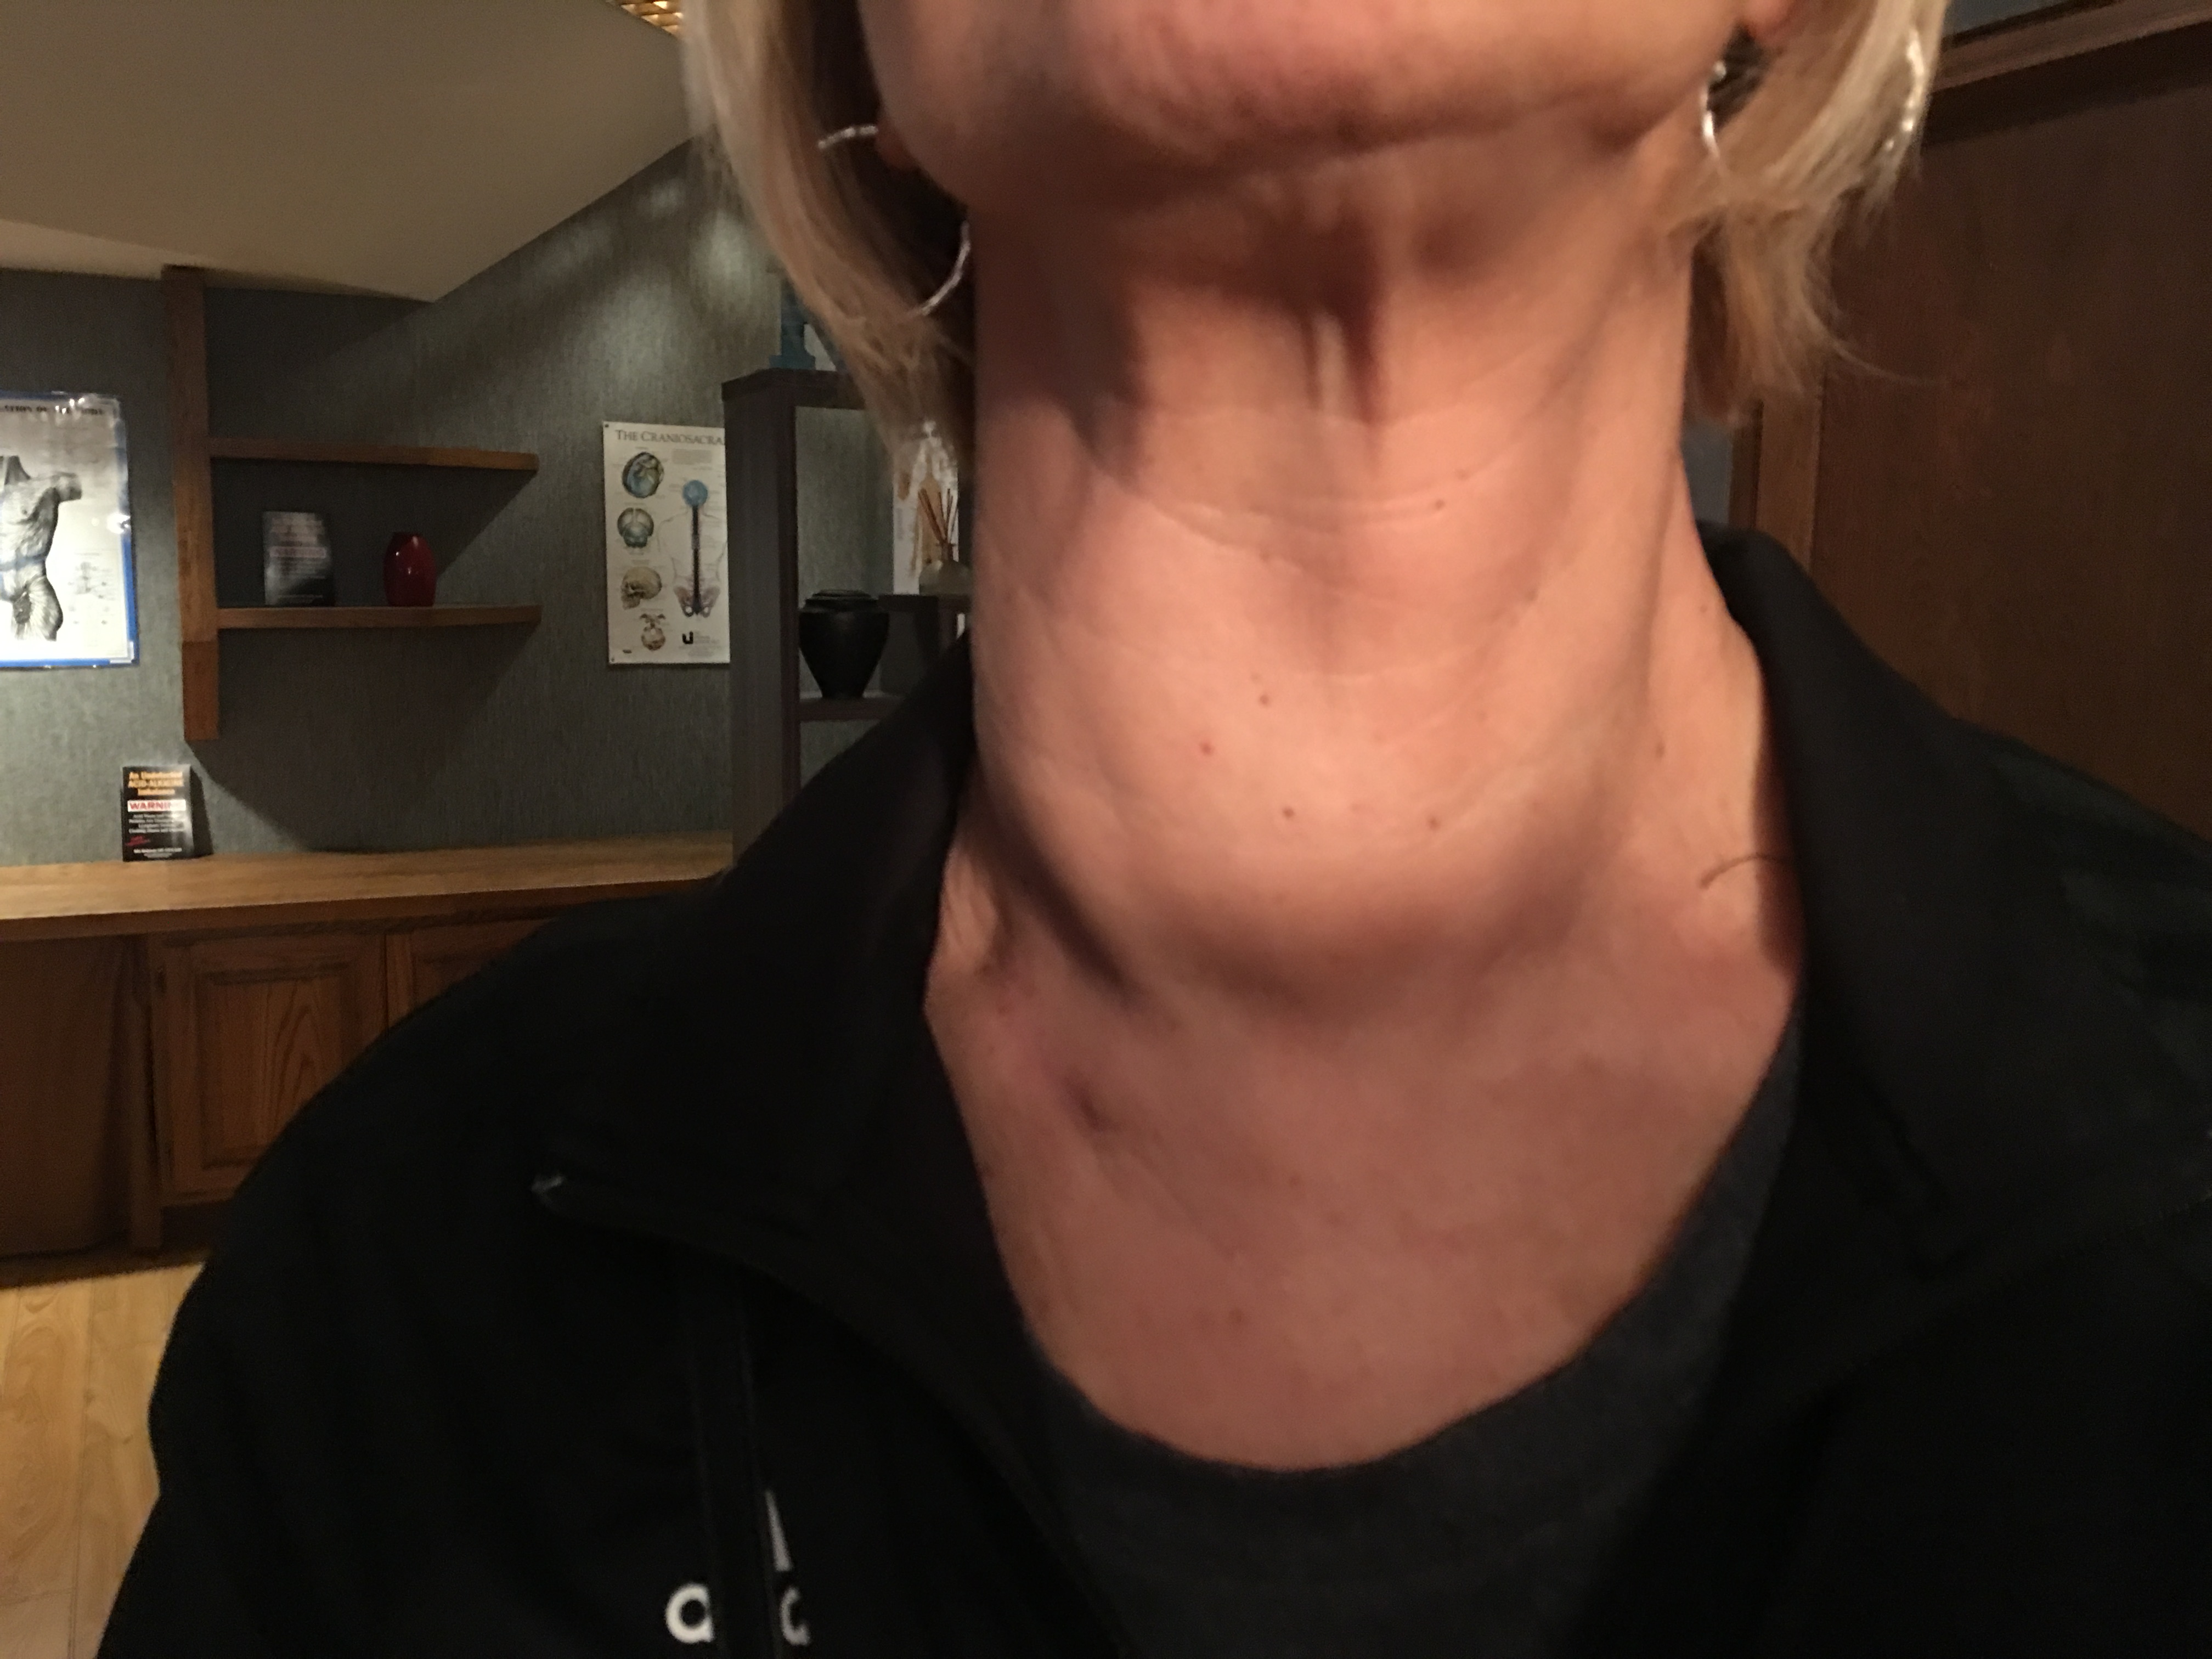 lymphoma swollen neck and supraclavicular lymph nodes